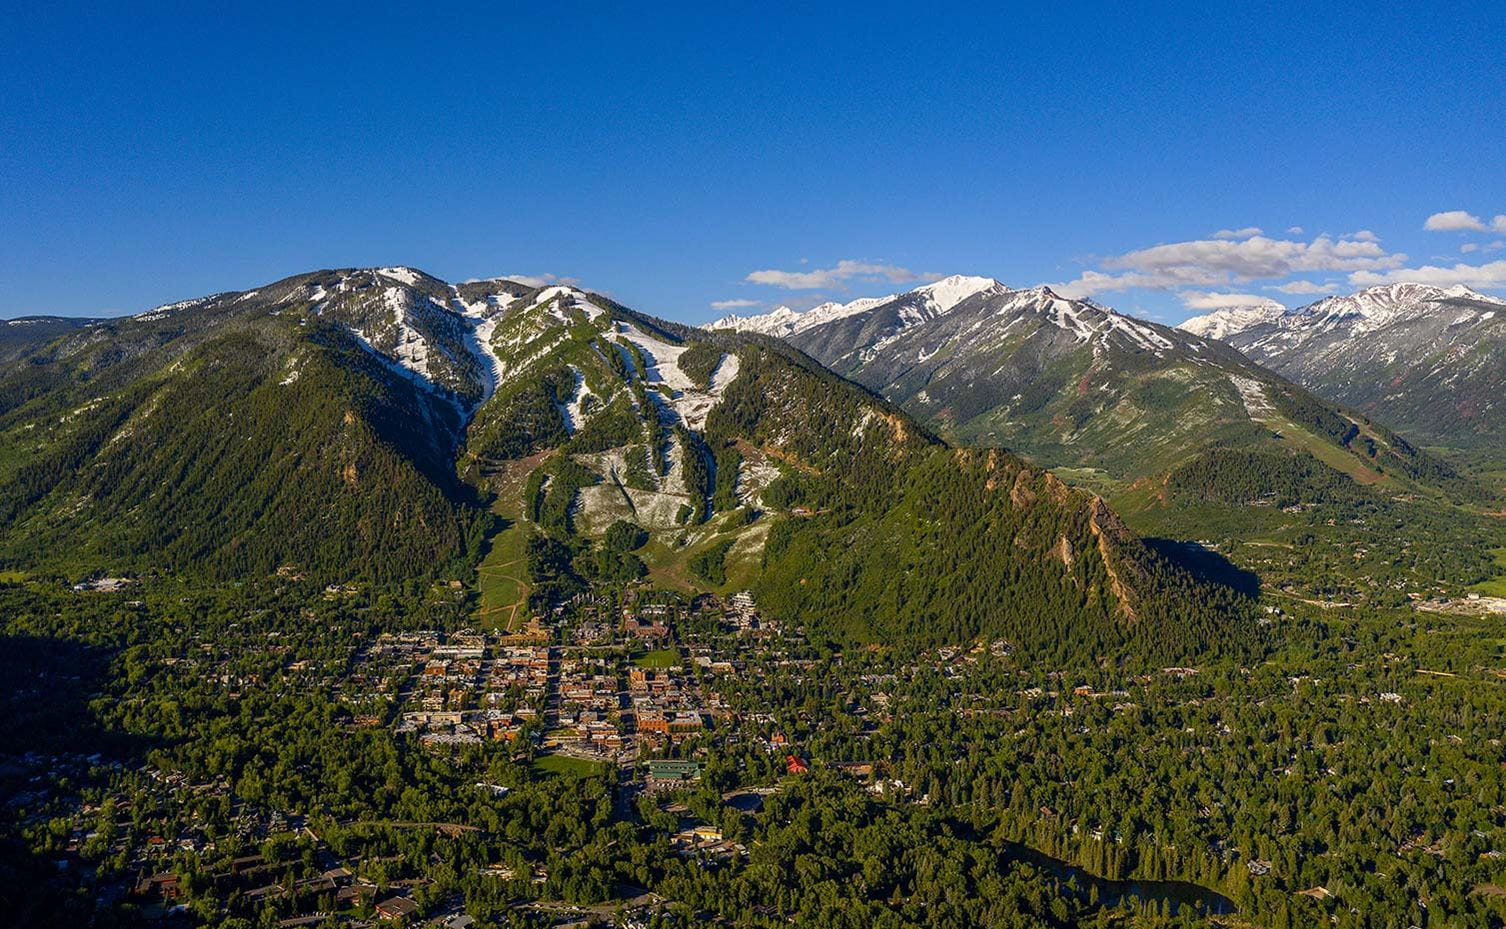 Aspen downtown after the first snow in late summer